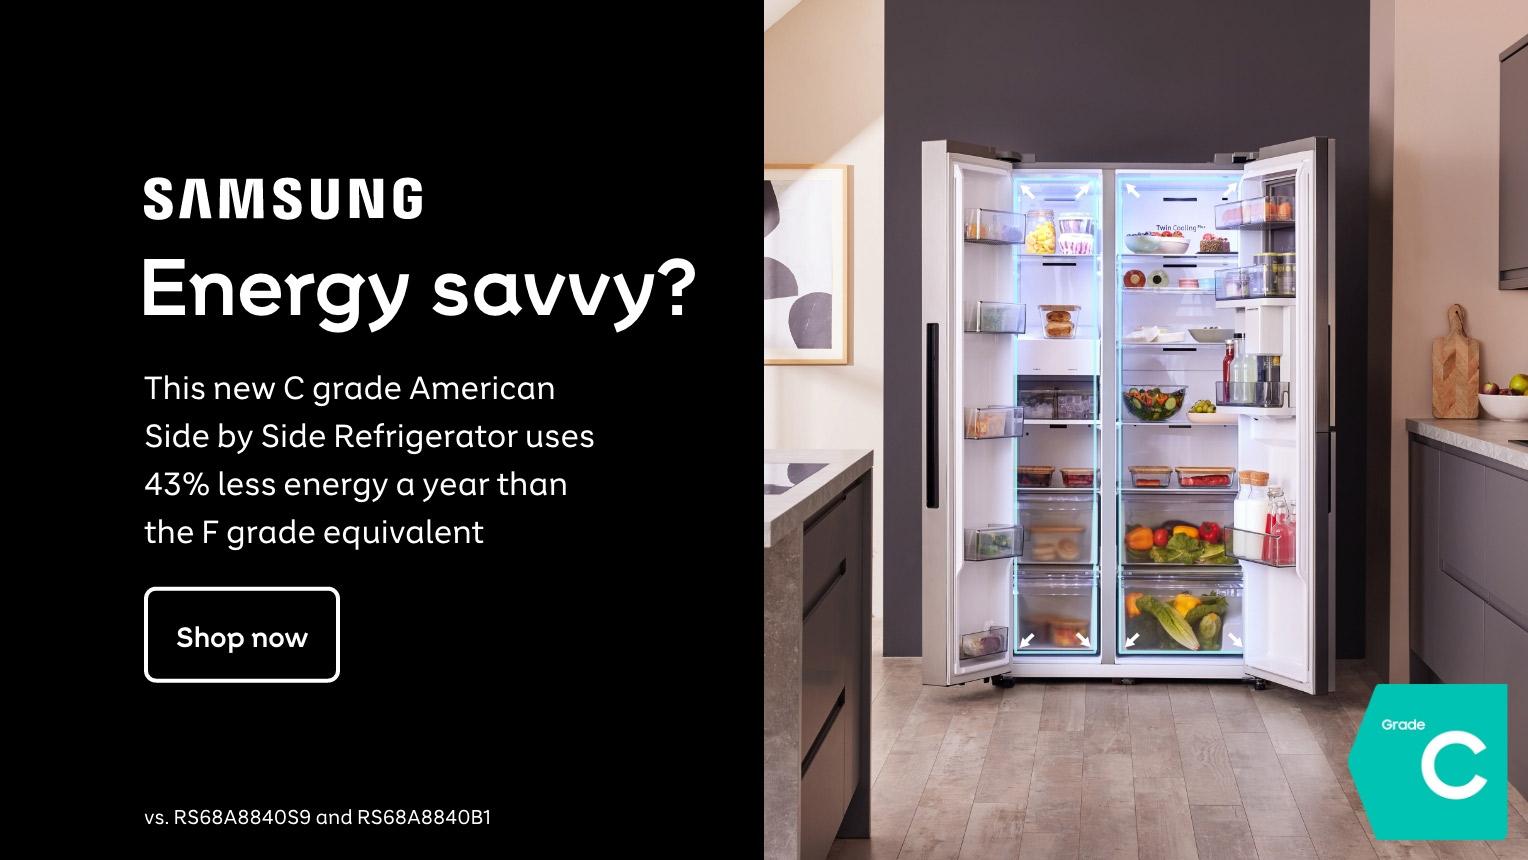 Samsung. Energy savvy? This new C grade American Side by Side Refrigerator uses 43% less energy a year than the F grade equivalent